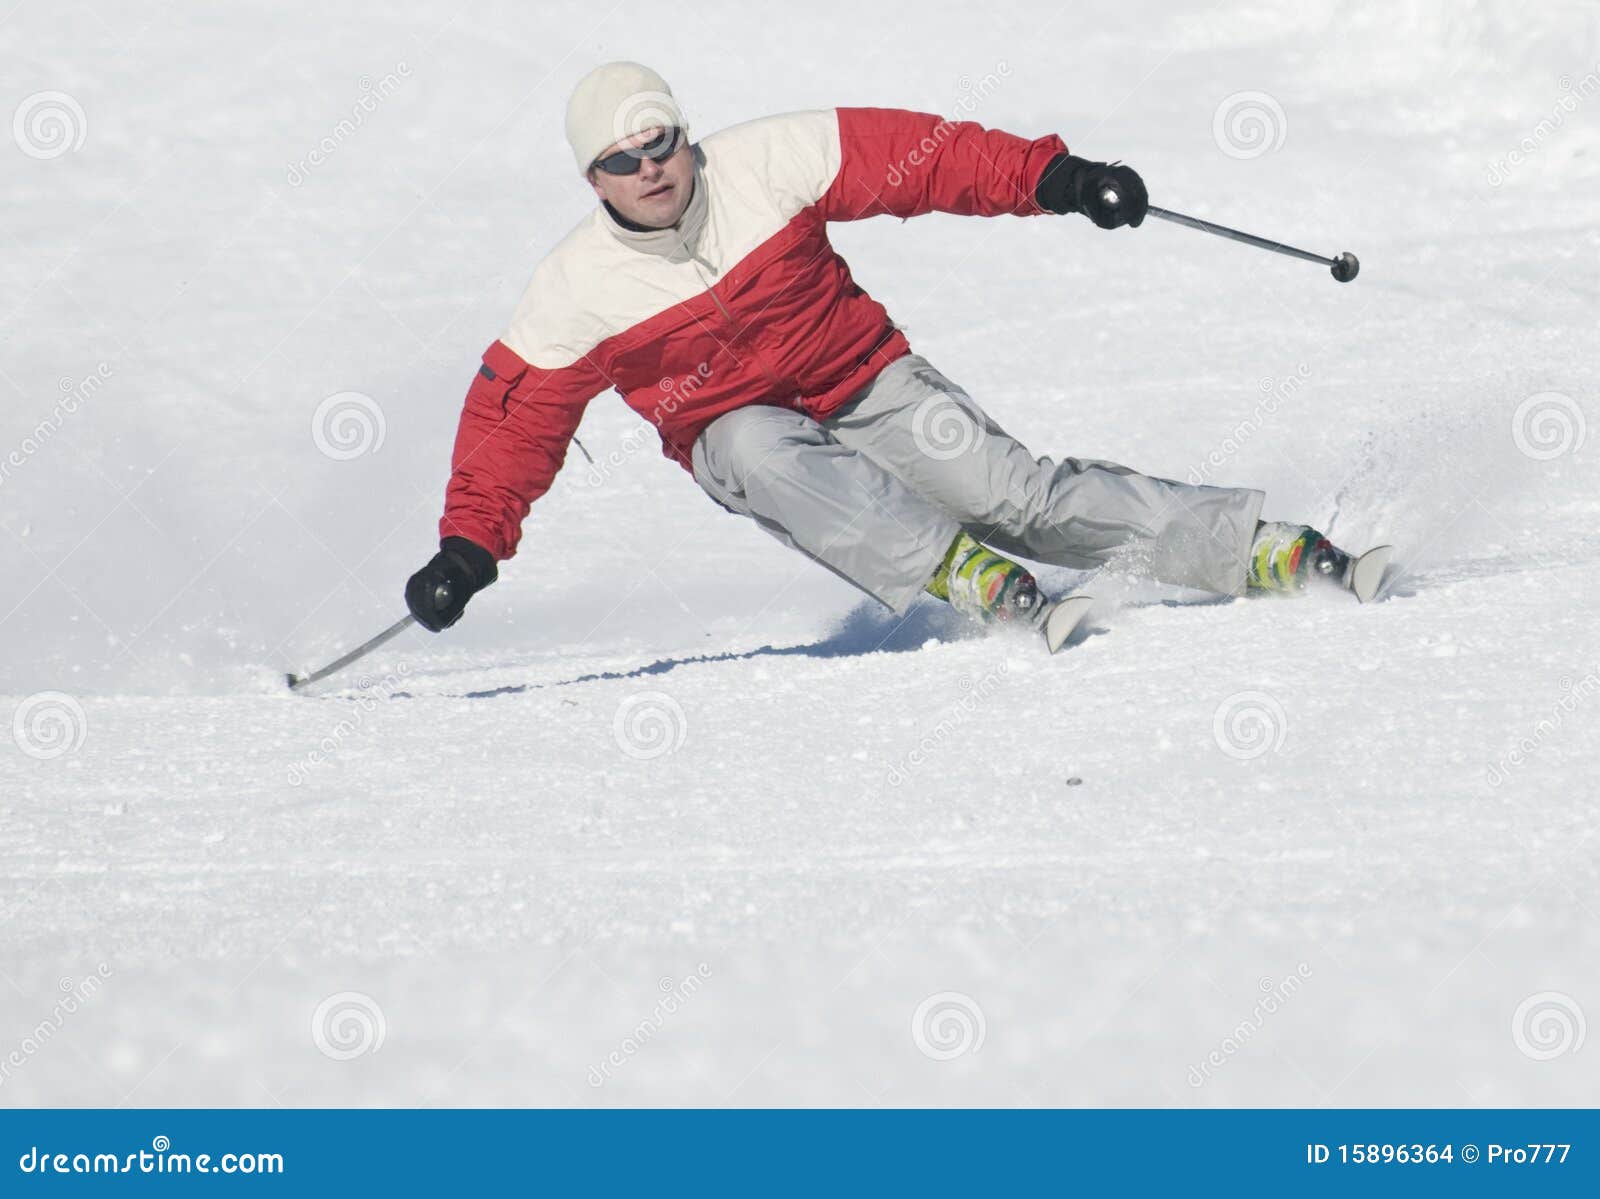 perfect skiing downhill